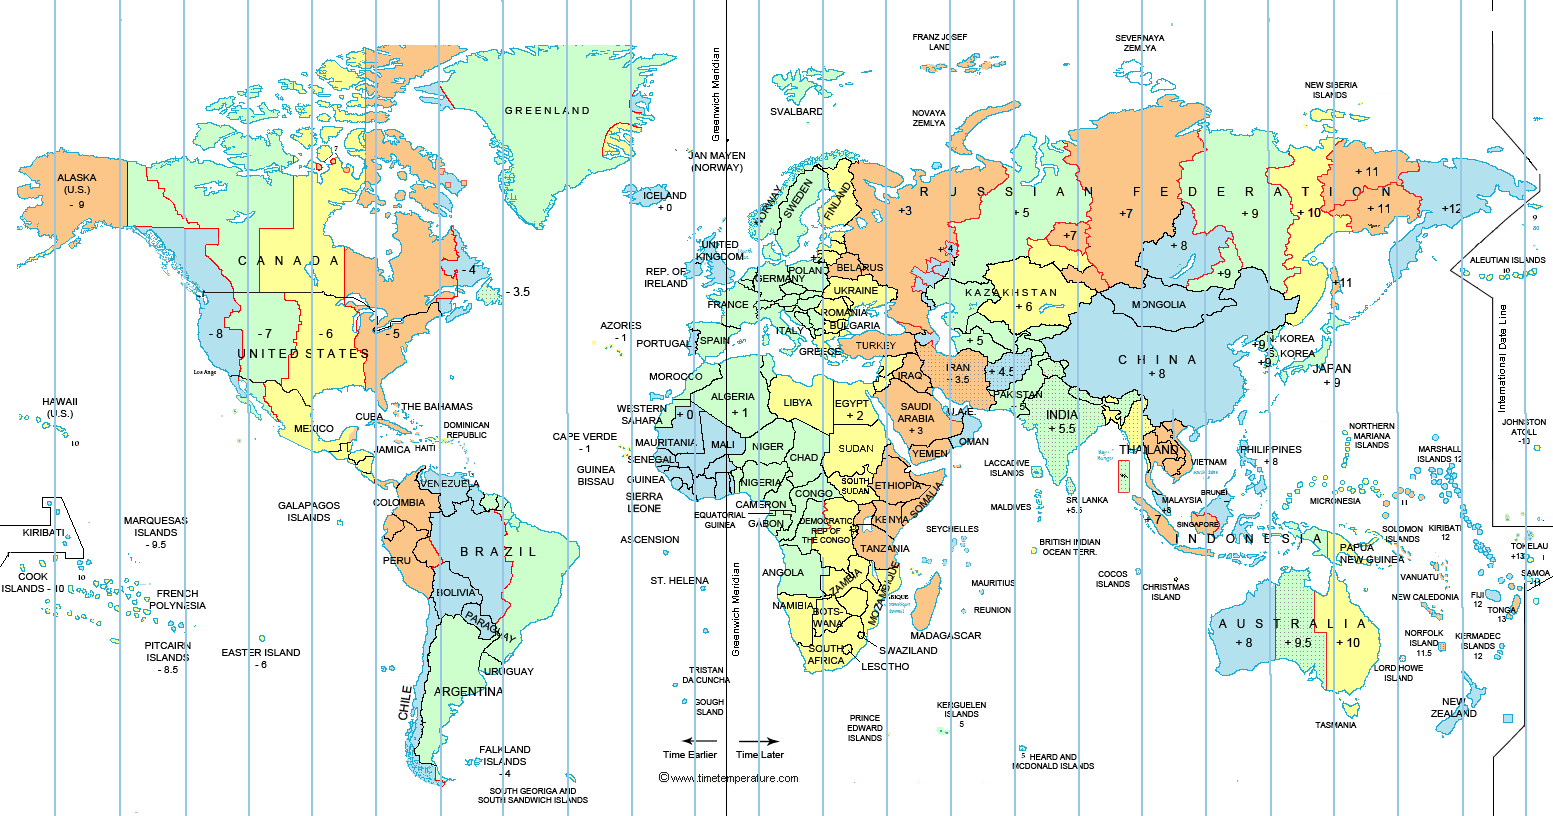 time zones of the world map Large World Time Zone Map time zones of the world map